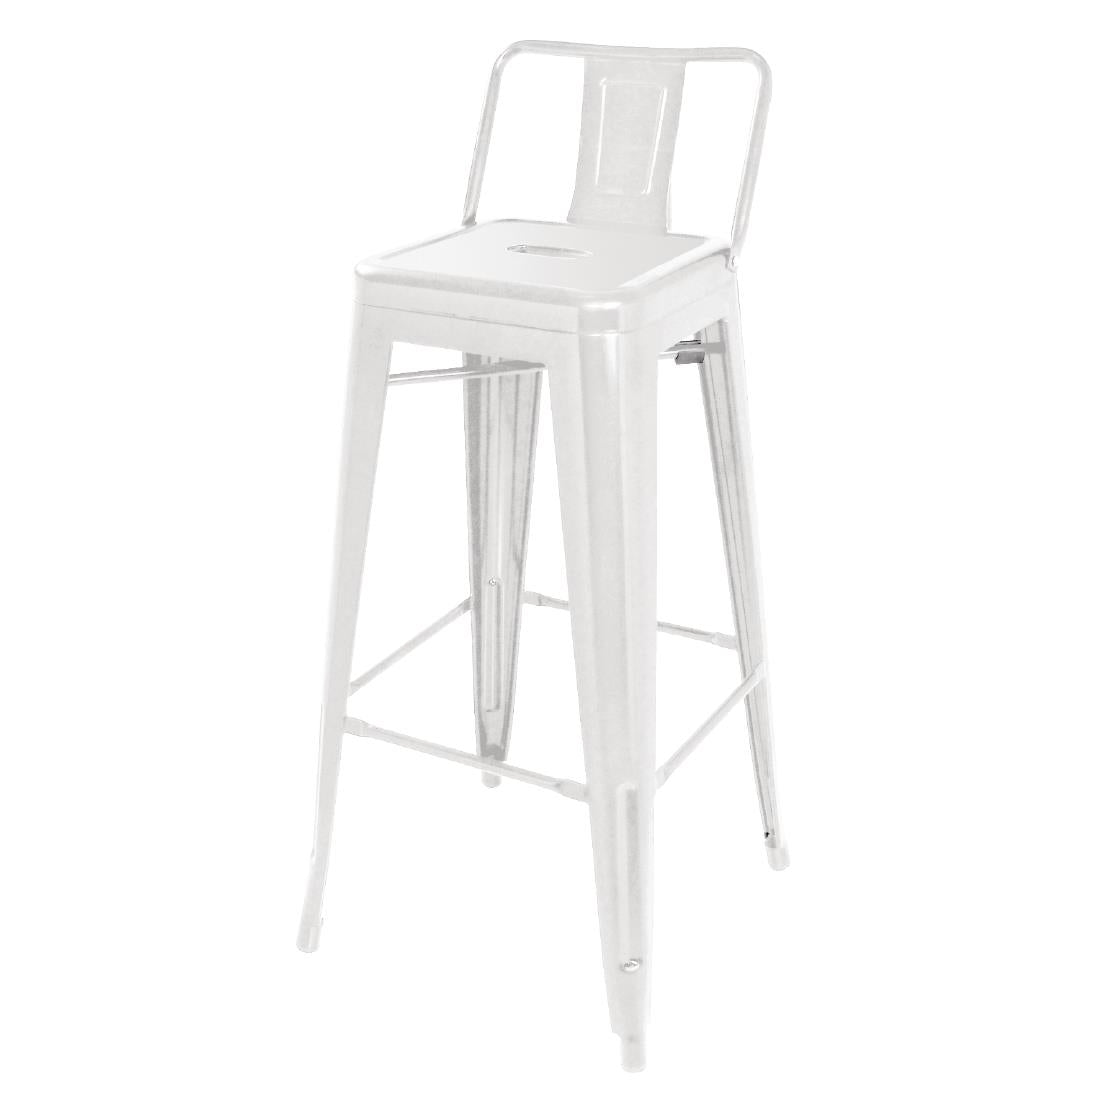 DL890 Bolero Bistro Steel High Stool With Backrest White (Pack of 4) JD Catering Equipment Solutions Ltd